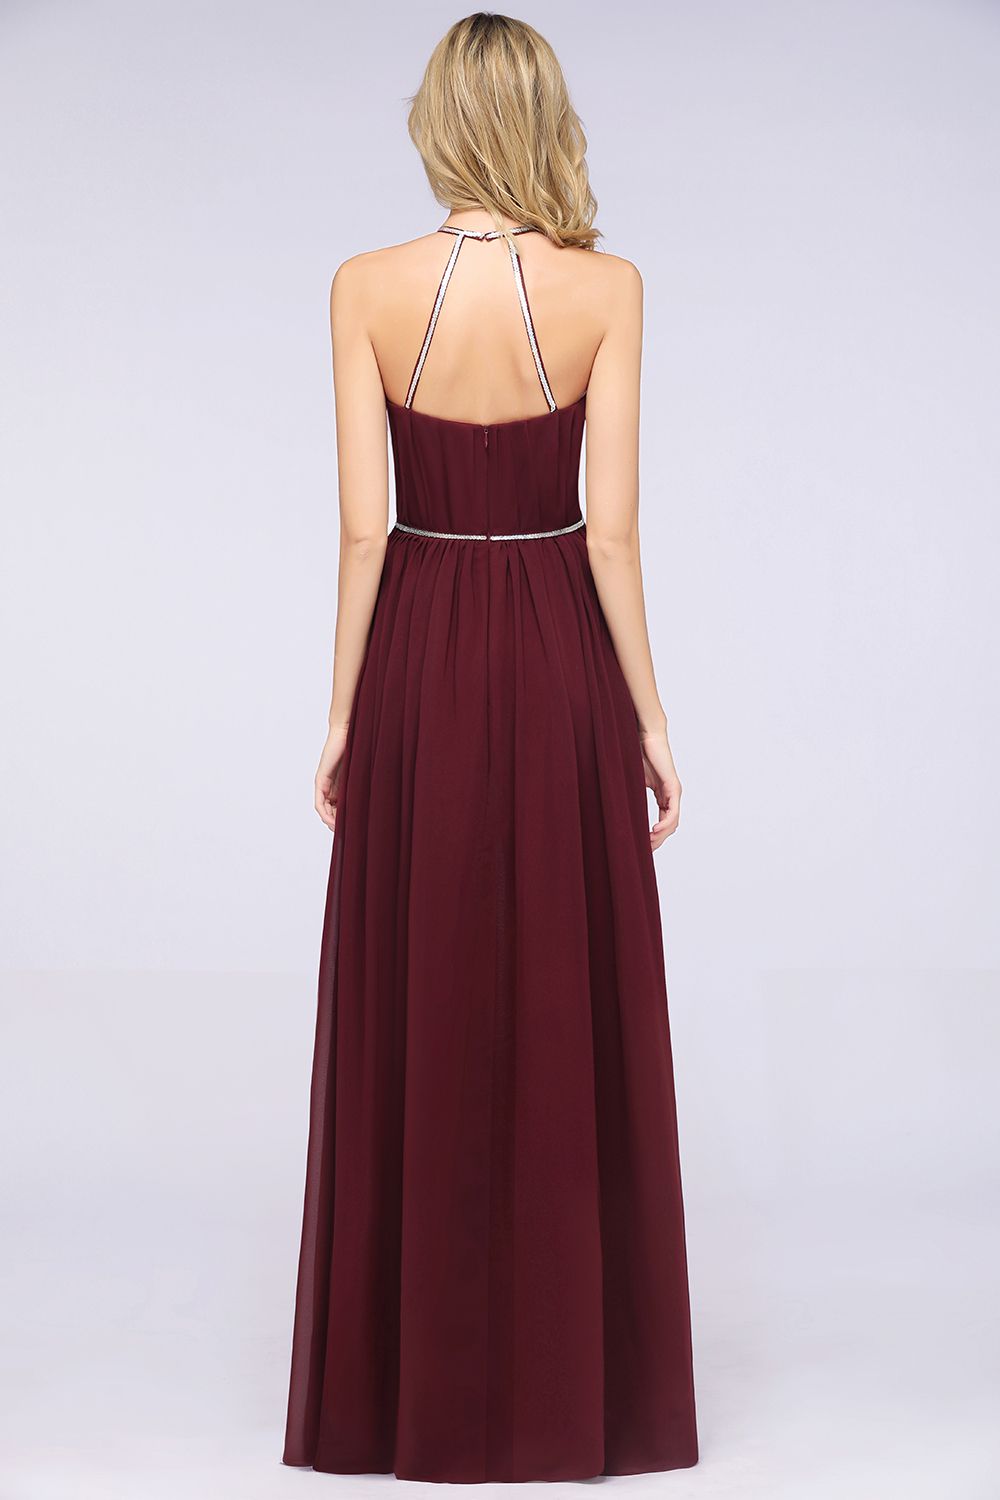 Chic Burgundy Halter Long Backless Bridesmaid Dress with Beadings-27dress